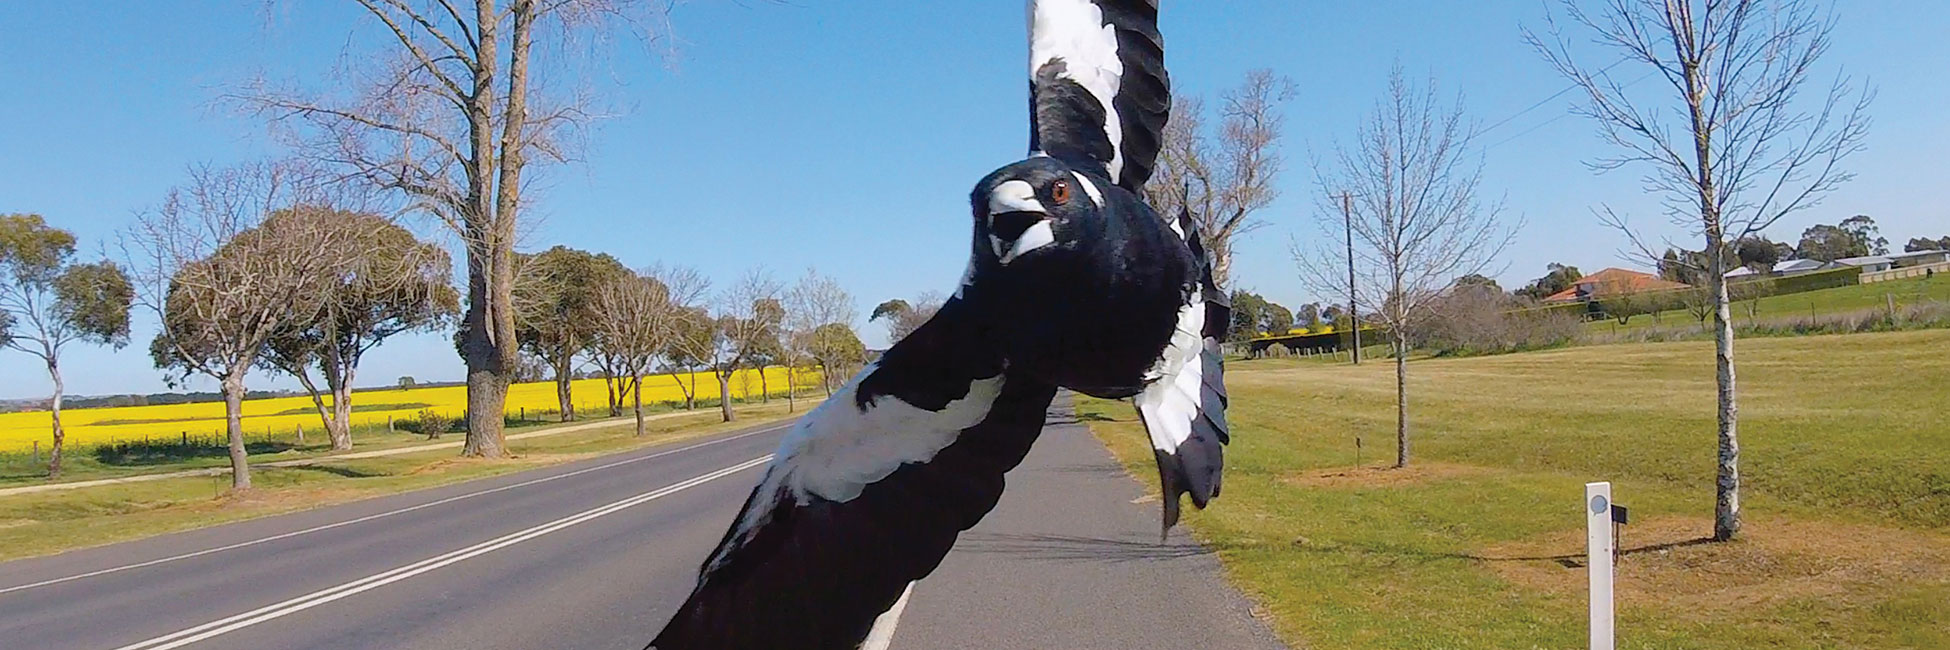 Swooping magpie cmyk